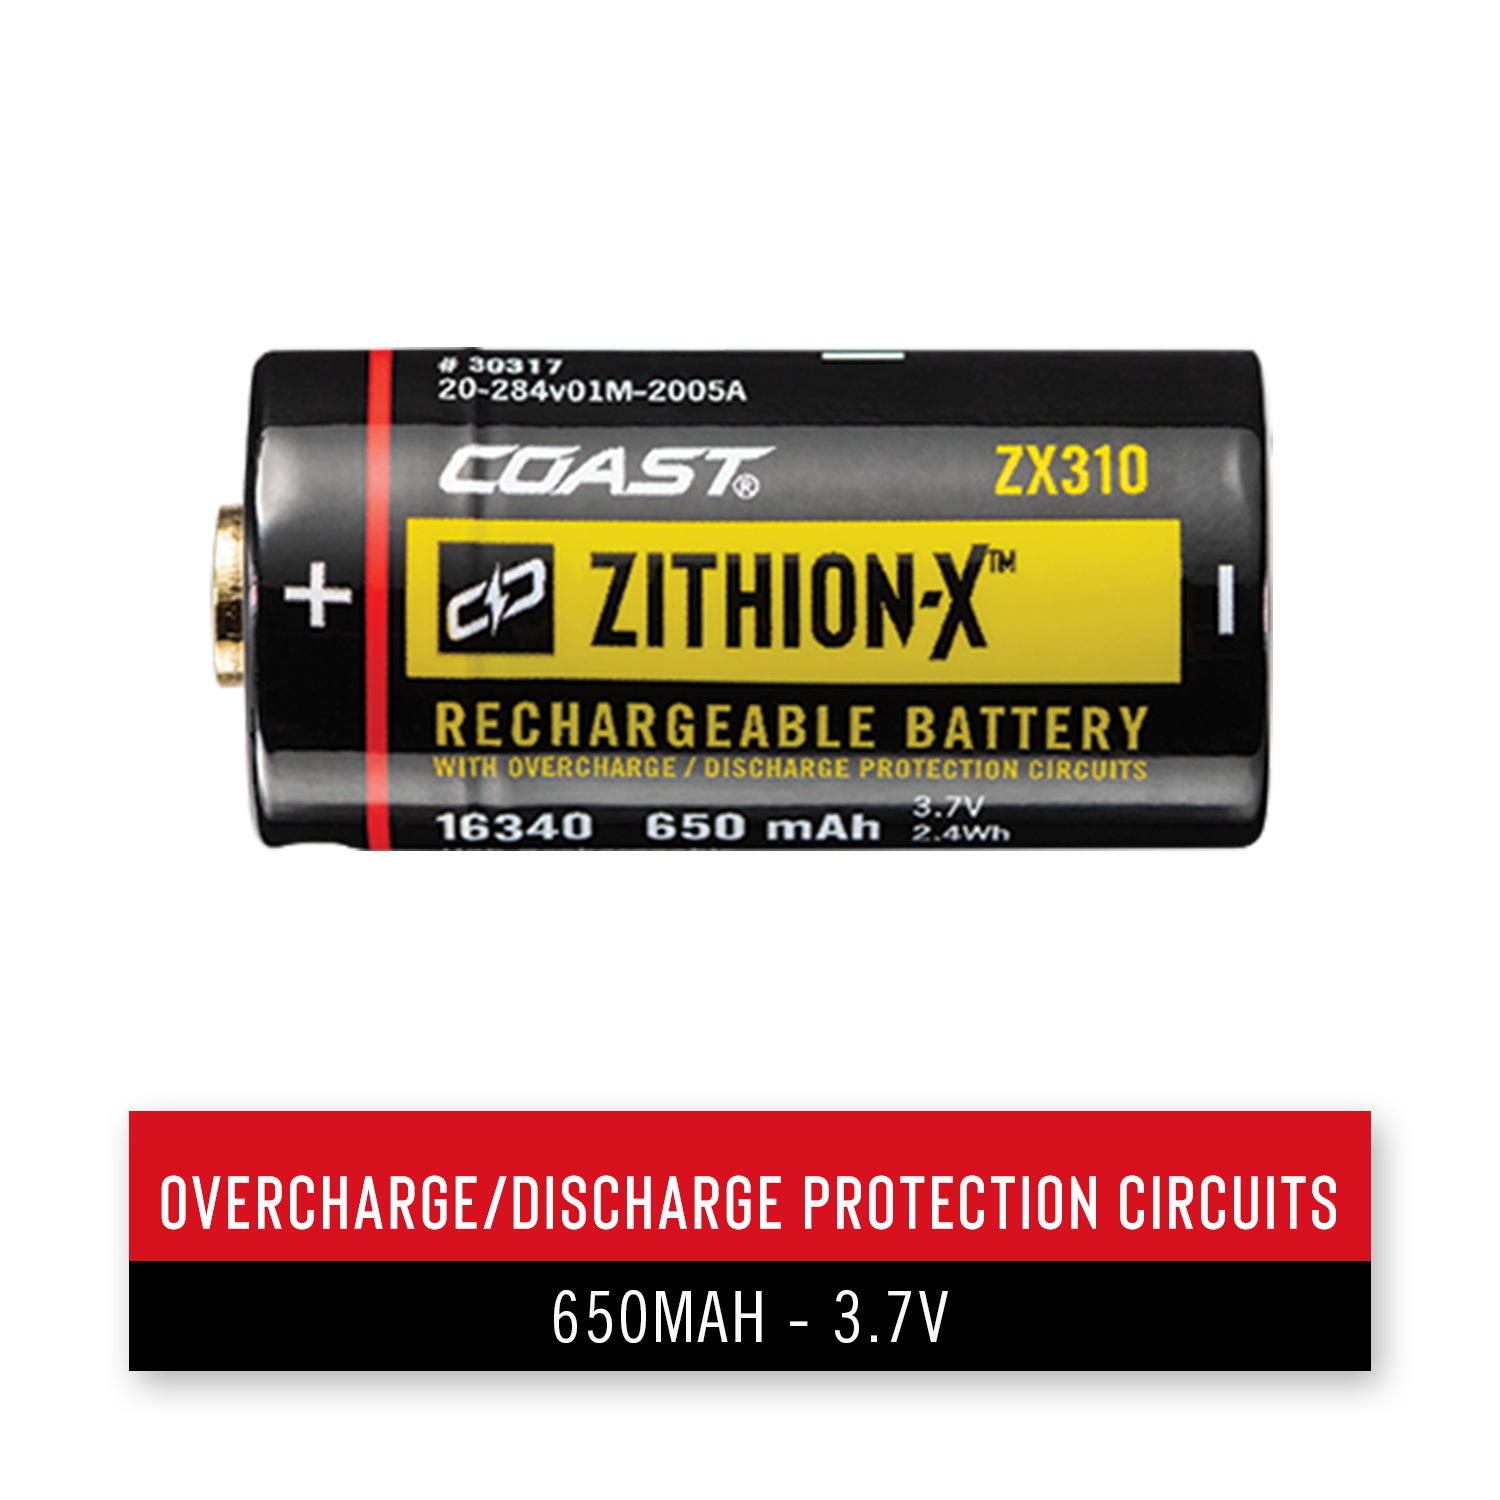 COAST ZX310 ZITHION-X Li-Ion Rechargeable Battery – COAST Products